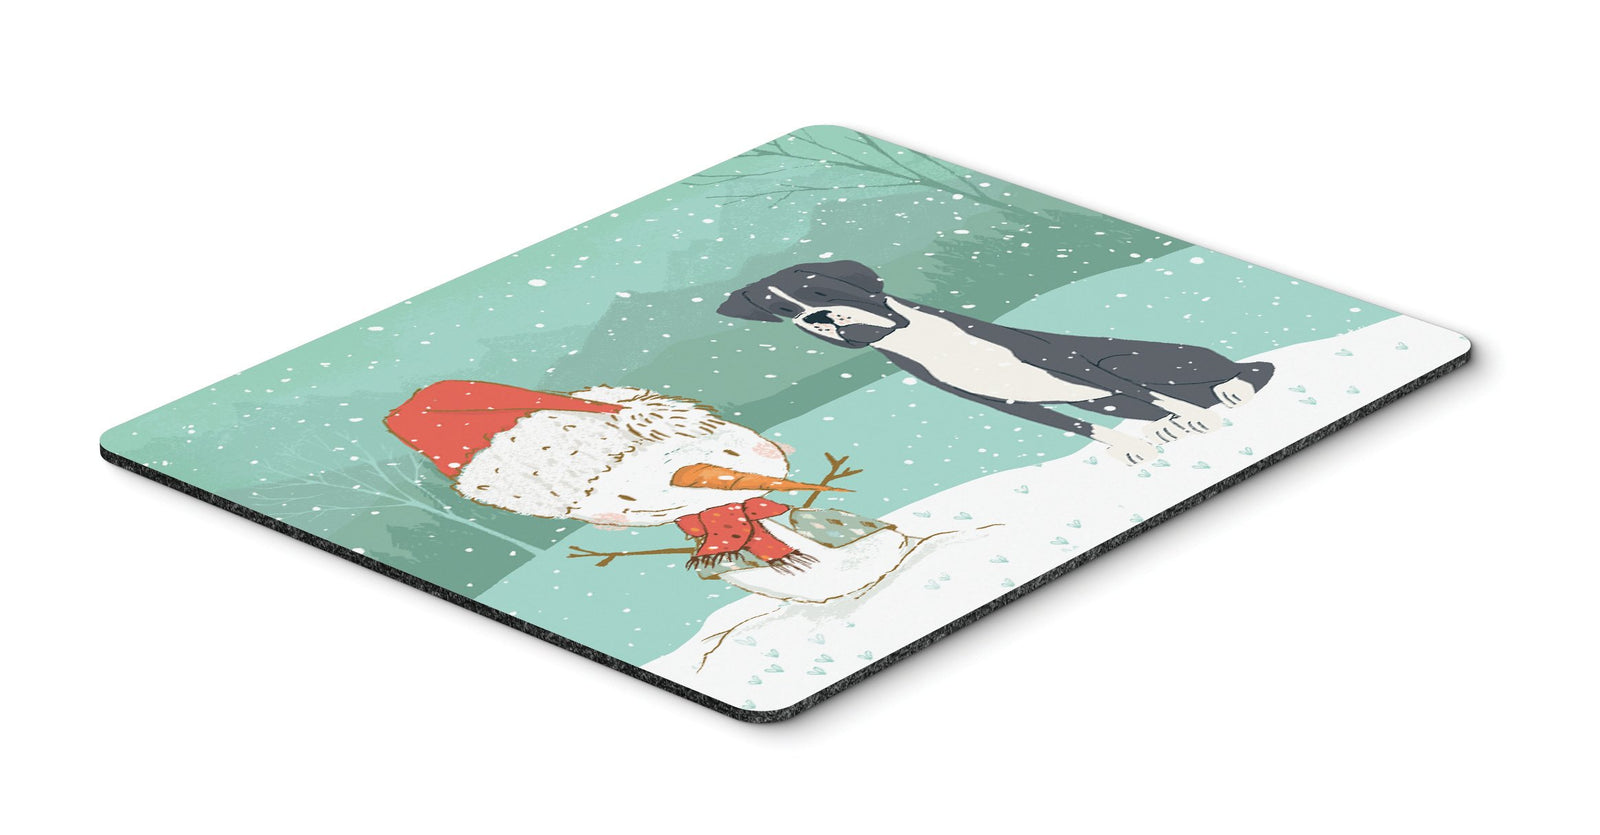 Black Boxer and Snowman Christmas Mouse Pad, Hot Pad or Trivet CK2035MP by Caroline's Treasures